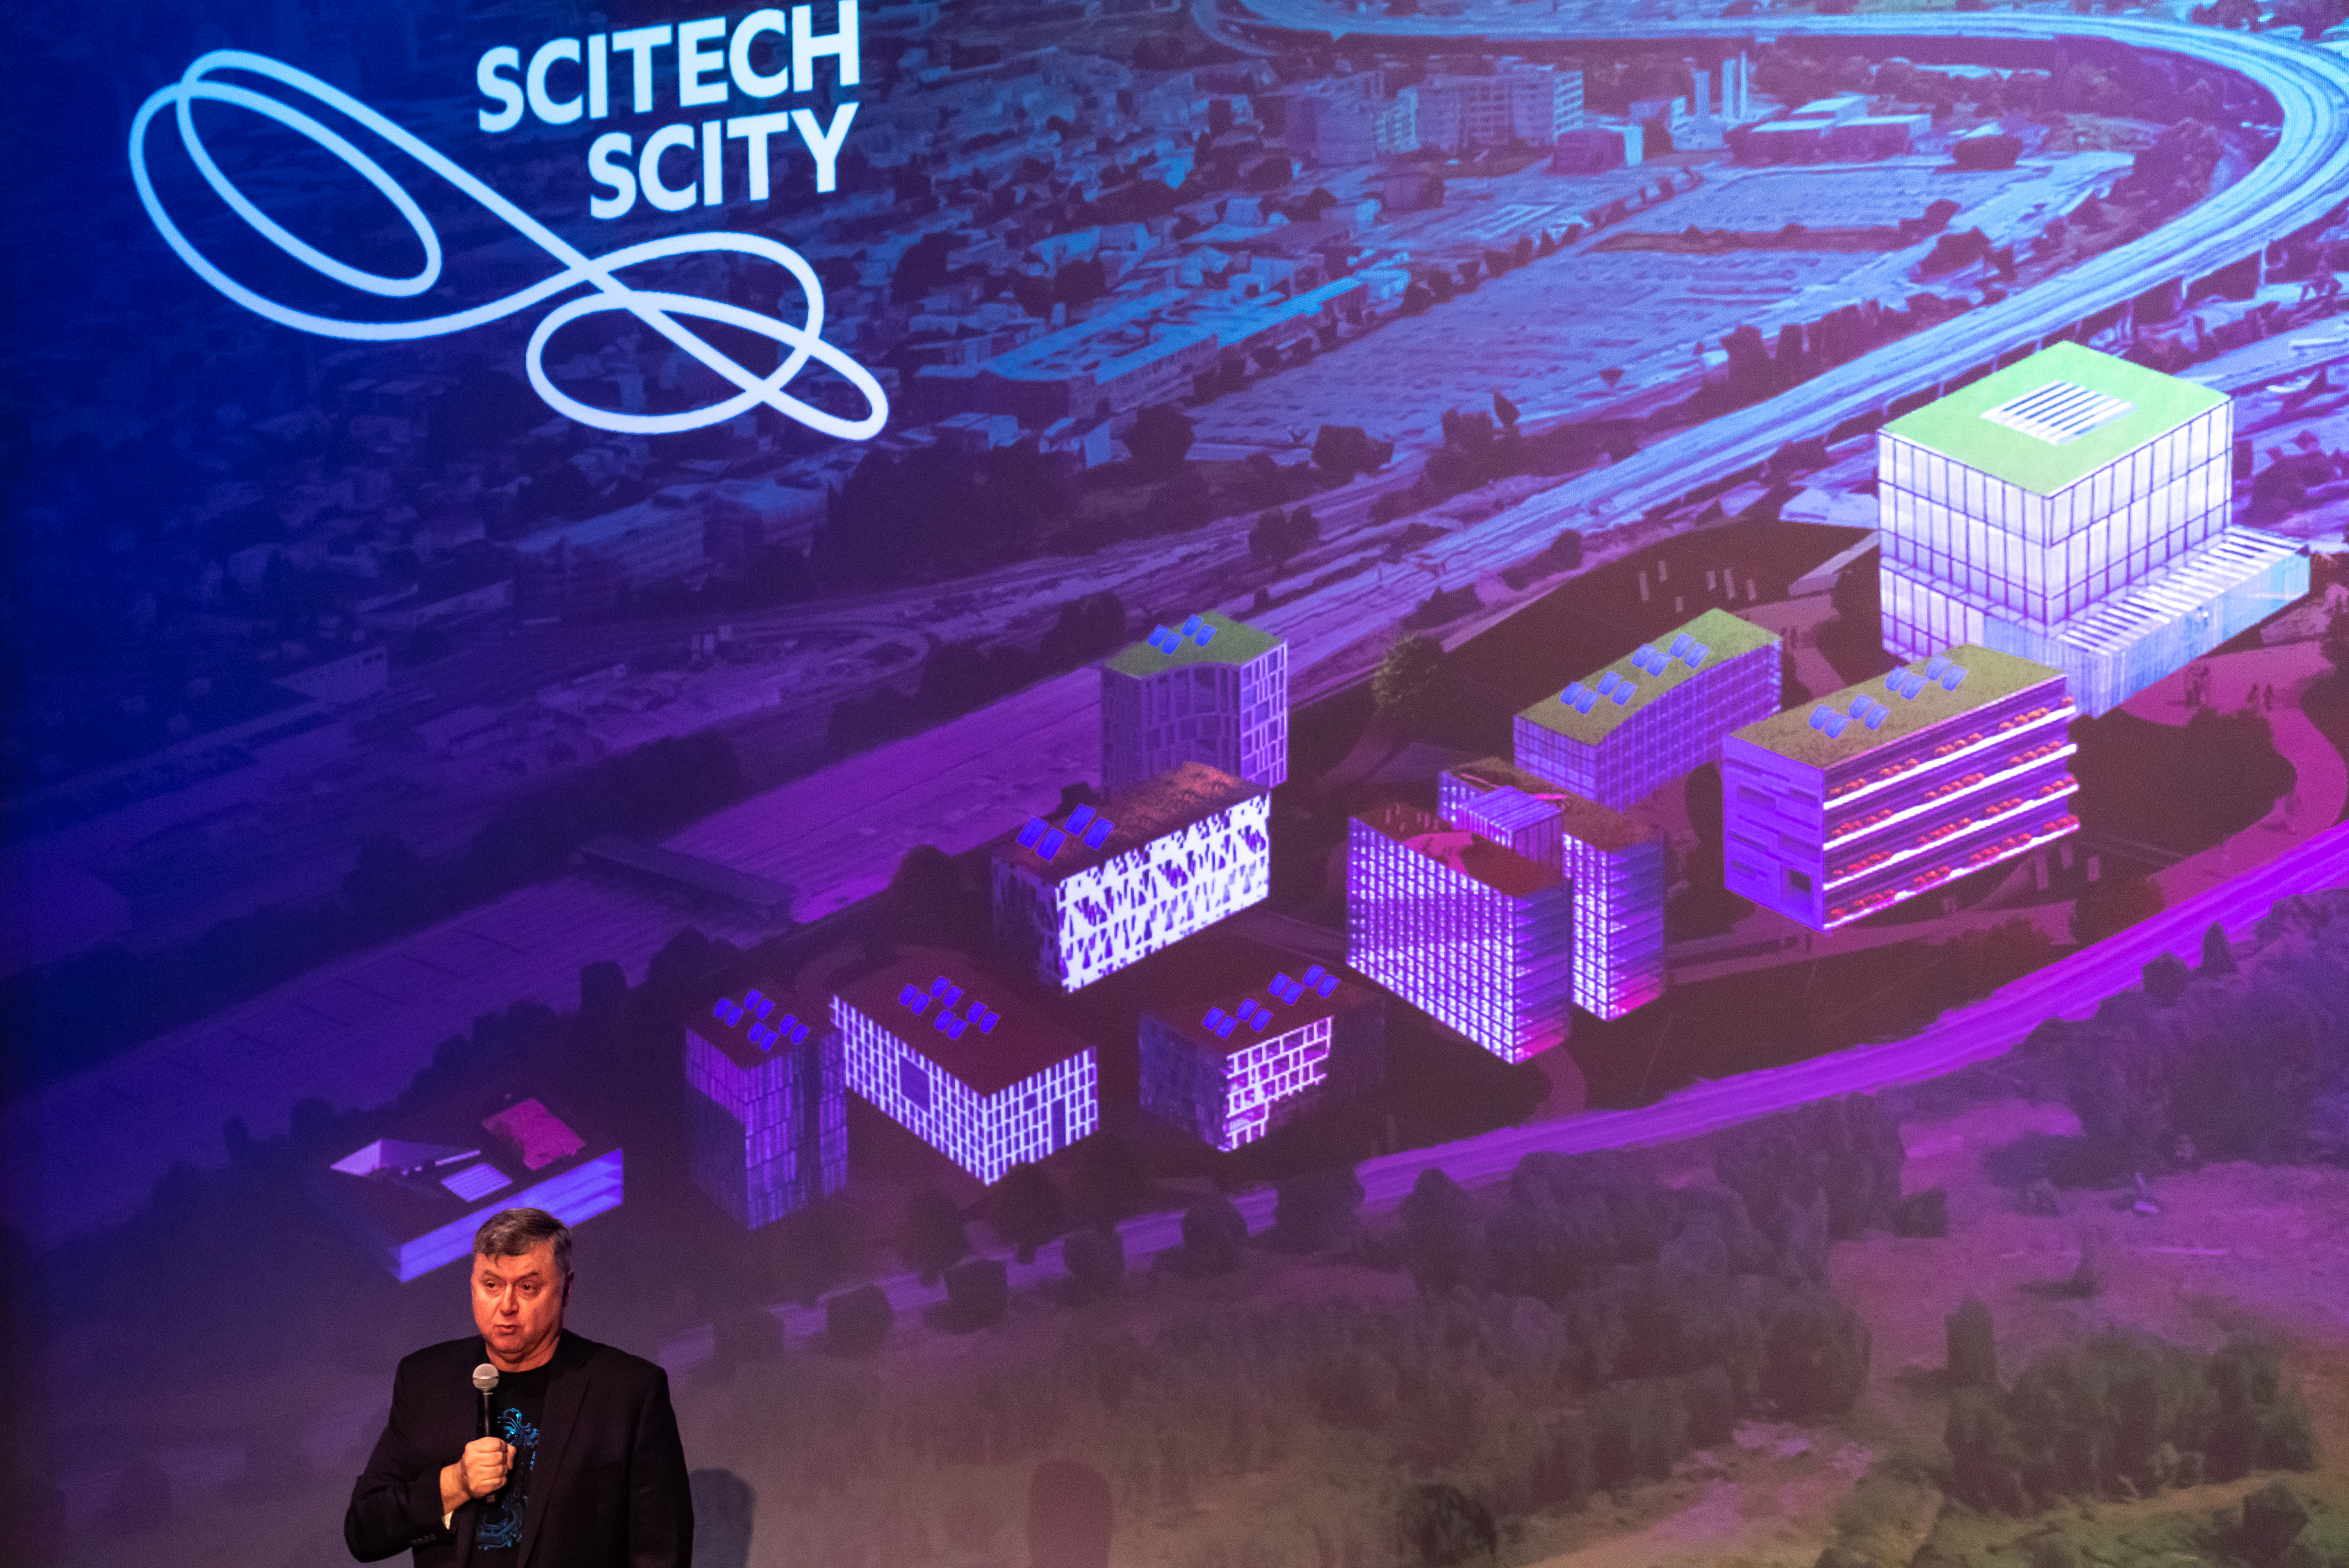 Paul Hoffman discusses plans for upcoming SciTech Scity campus